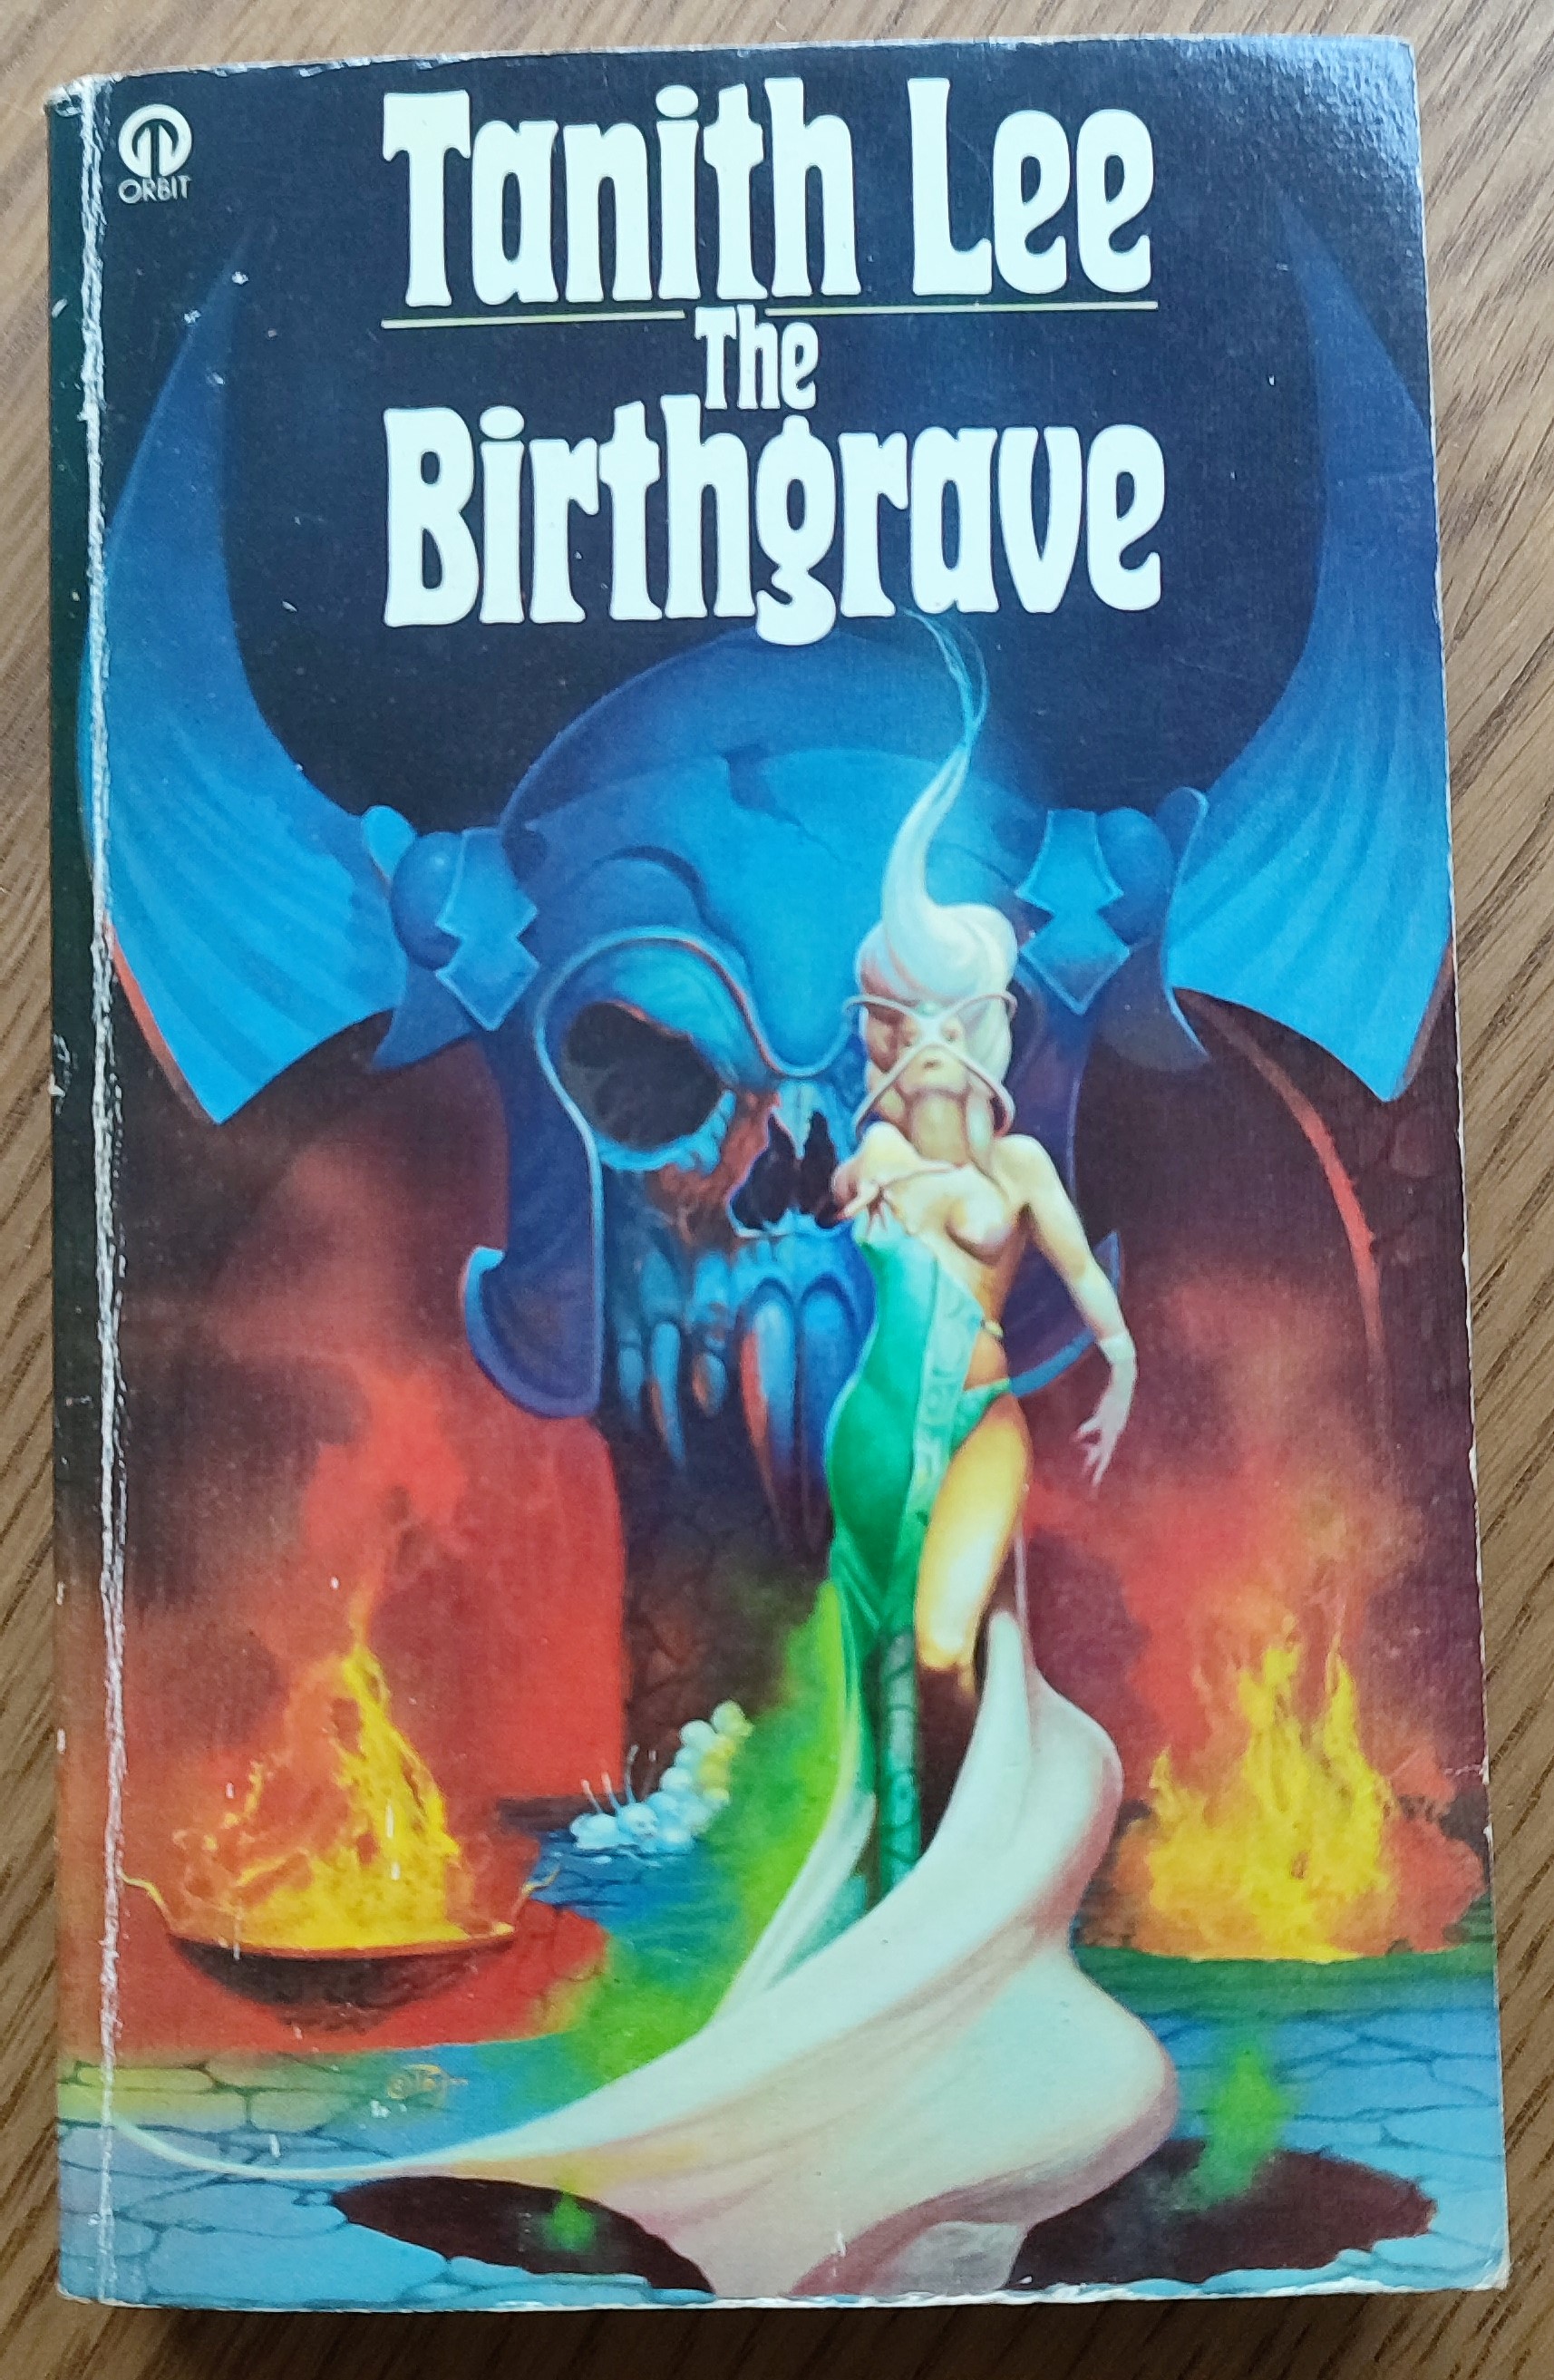 The Birthgrave by Tanith Lee with glorious 70's cover art depicting a wan-looking, barely dressed young woman standing before a giant floating skull surrounded by flames.